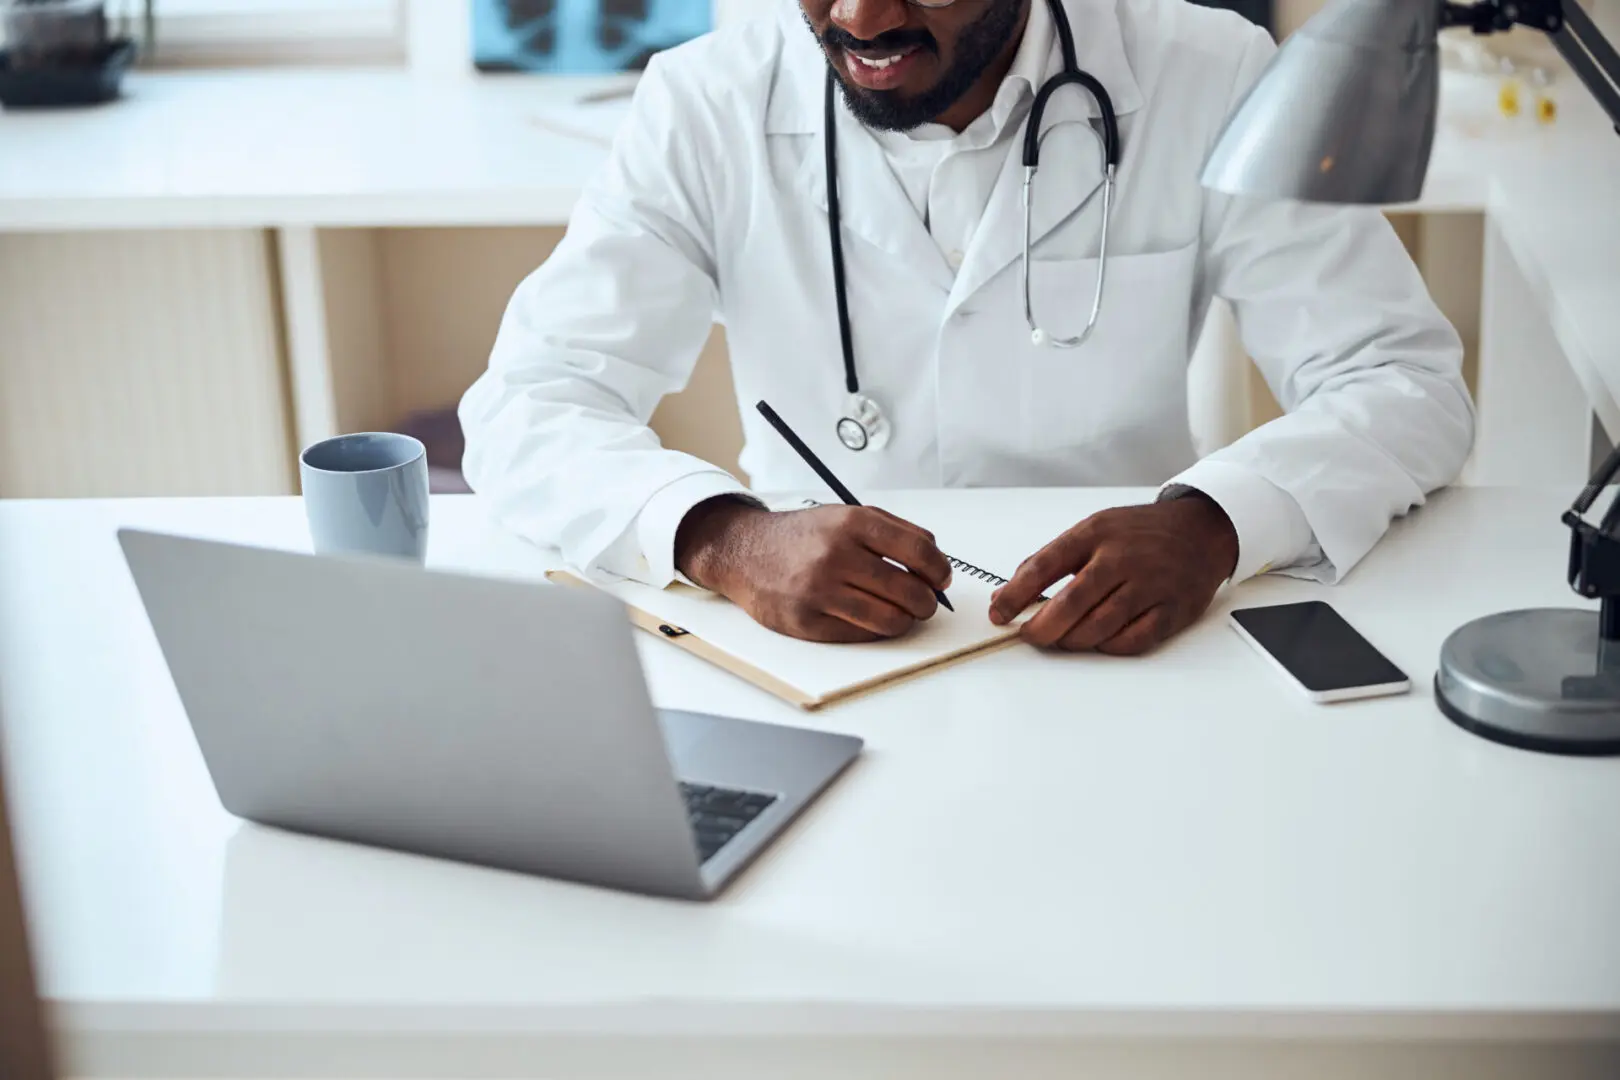 A doctor writing on paper at desk with laptop in background.